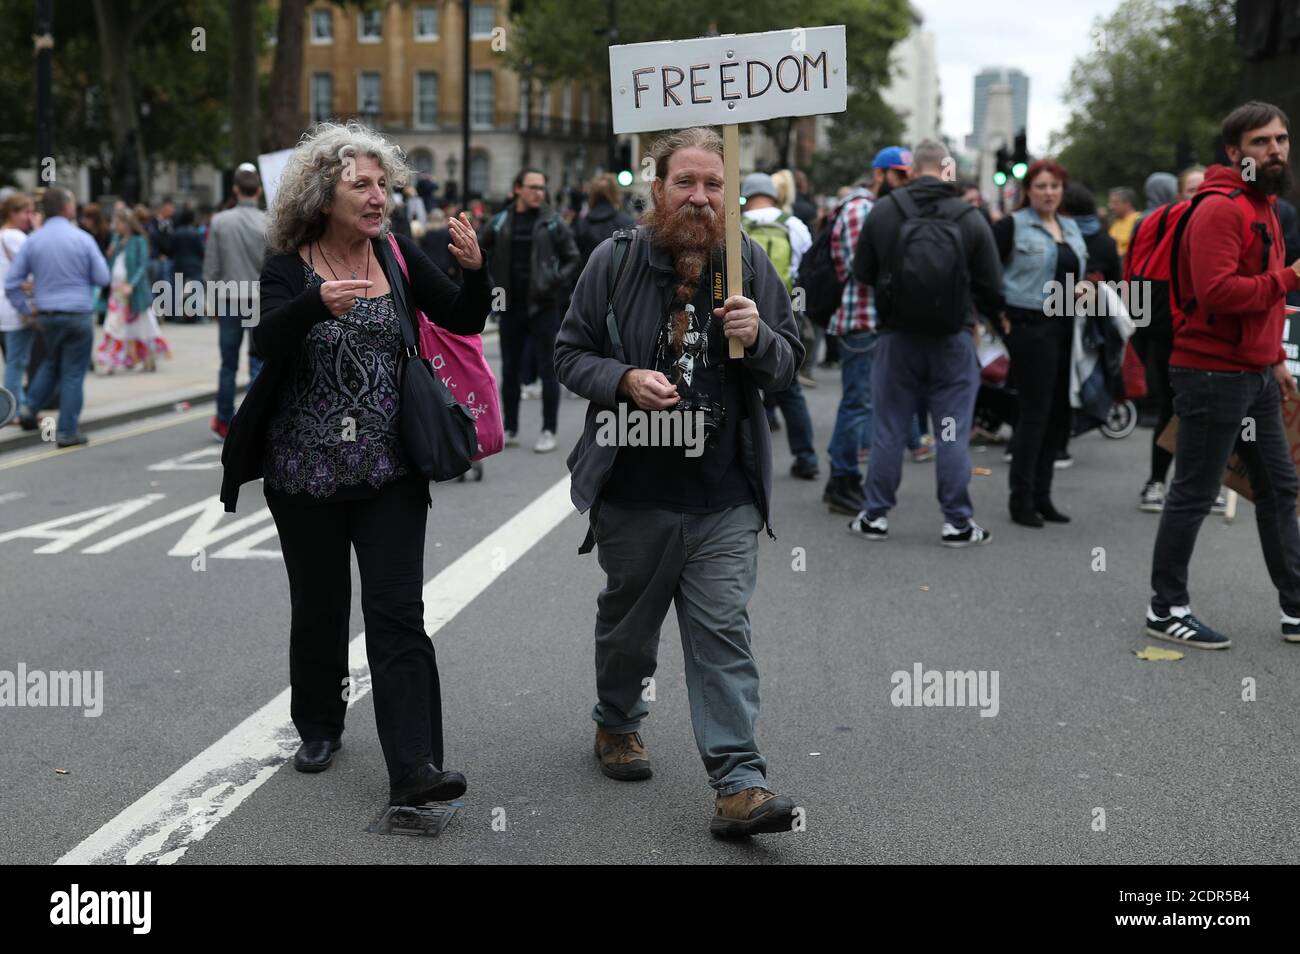 Anti-lockdown protesters, who believe that the coronavirus pandemic is a hoax, gather at the 'Unite For Freedom' rally in Trafalgar Square, London. Stock Photo